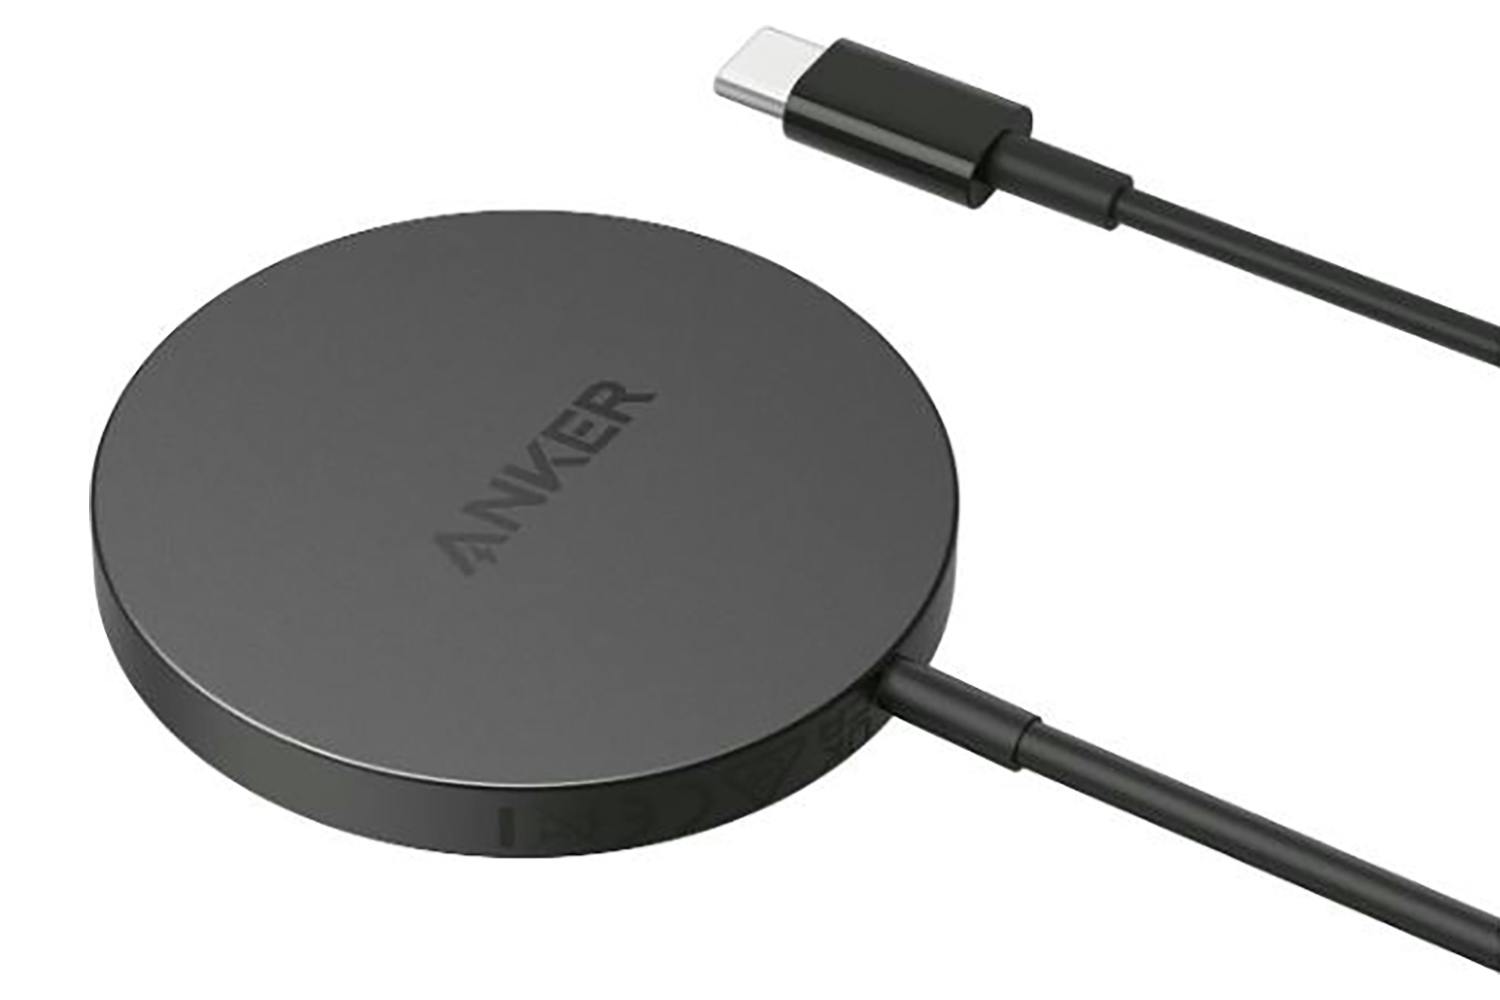 Anker Powerwave Select+ 7.5W Wireless Magnetic Charging Pad | Black